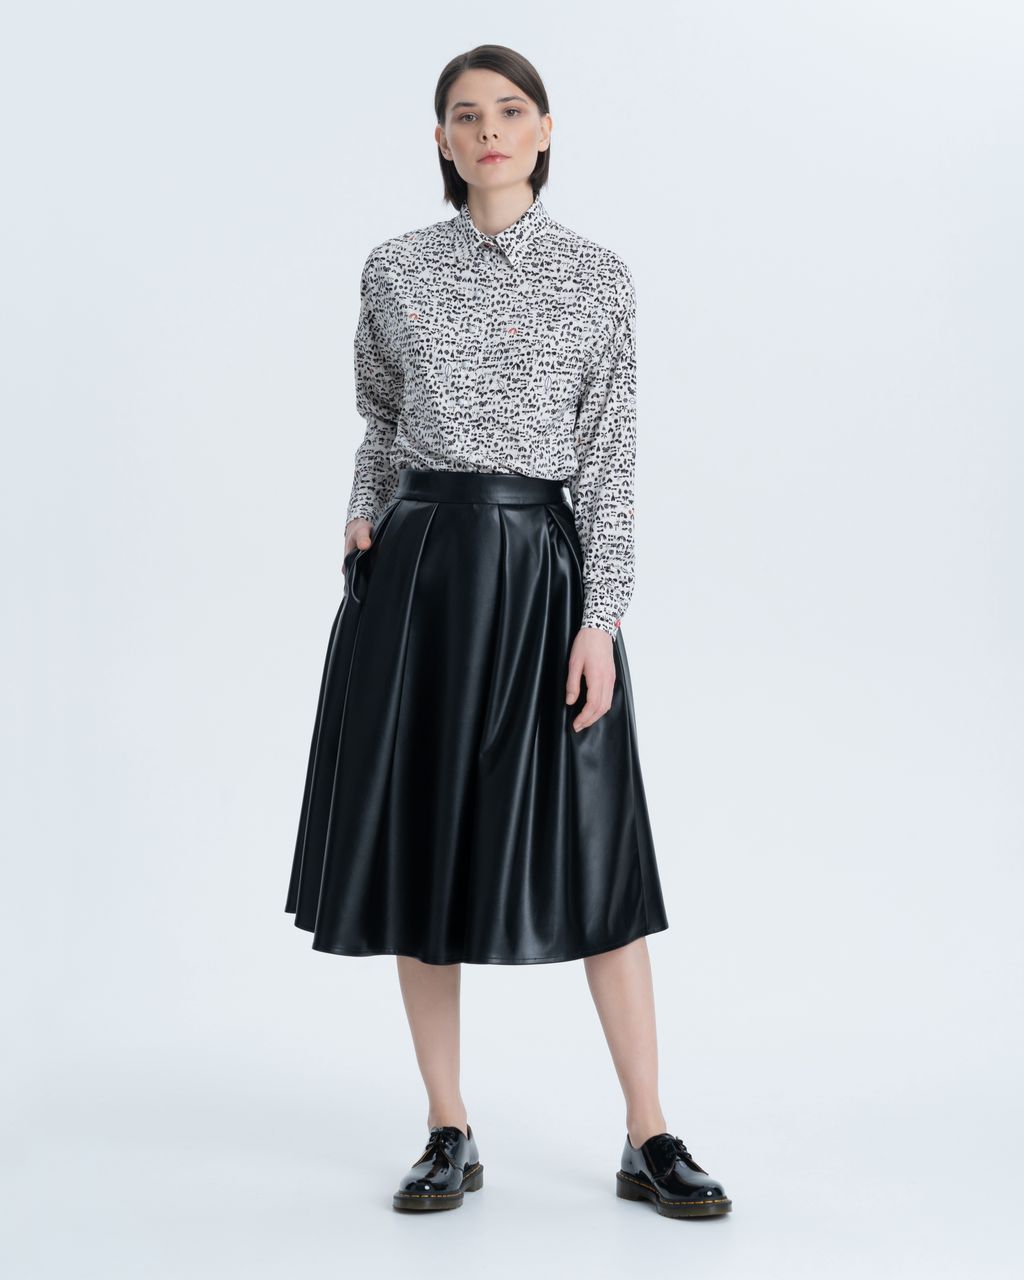 Elongated blouse in a loose silhouette with side seams moved forward. A turn-down collar, a thin graphic print in the form of beetles and moths, cuffs and placket with original volume buttons give it a special chic.